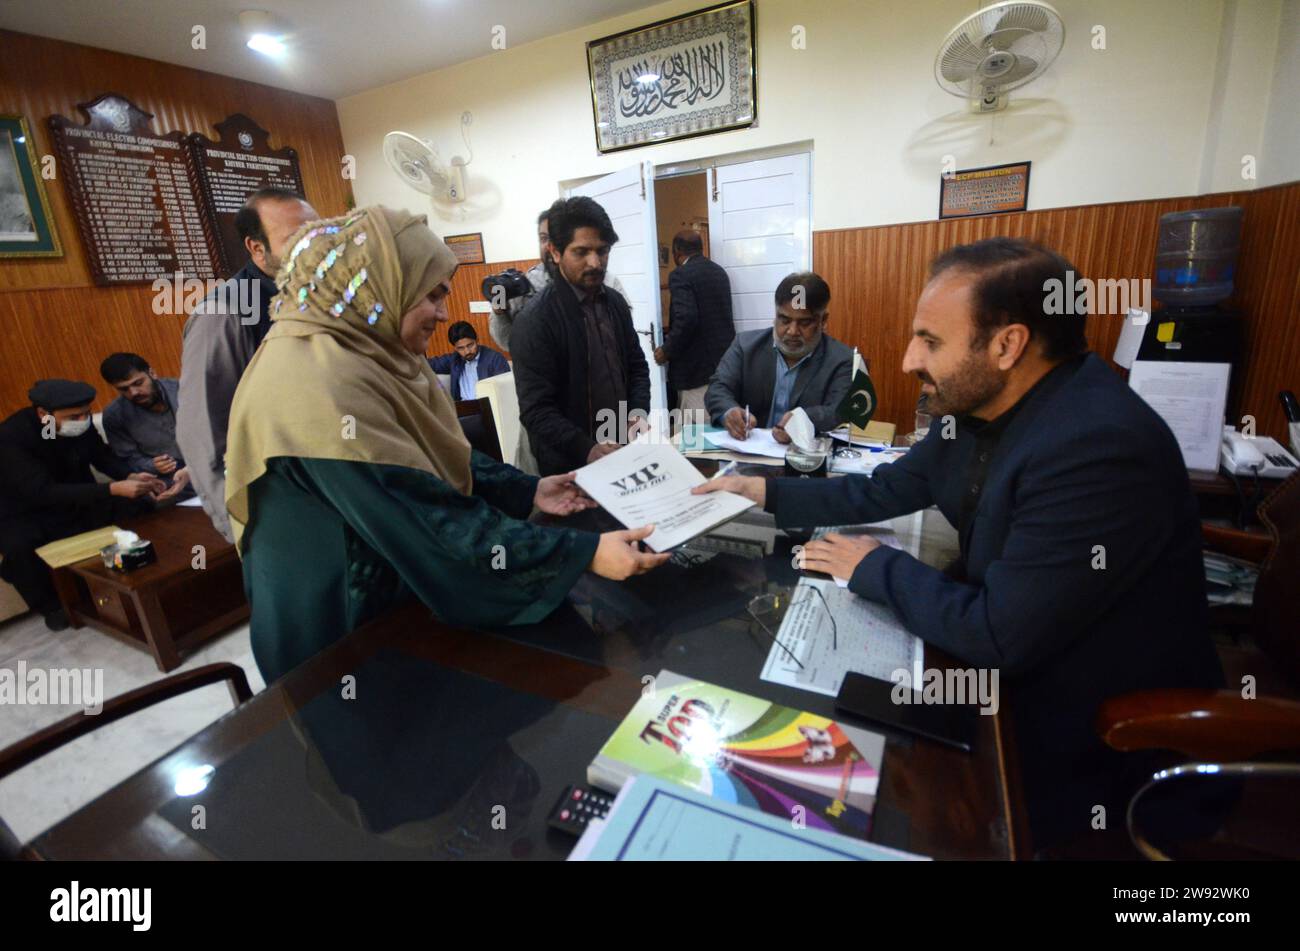 Peshawar, Peshawar, Pakistan. 23rd Dec, 2023. Pakistan Election Commission began receiving nomination papers for the upcoming general elections .PESHAWAR, PAKISTAN, DECEMBER, 23: The electoral process in Pakistan has commenced as the Election Commission began receiving nomination papers for the upcoming general elections scheduled for 08 February 2024. With over 128.5 million registered voters, candidates from 175 political and religious parties will vie for 266 National Assembly seats and 593 Provincial Assembly seats. The Election Commission's schedule includes the filing of nomination p Stock Photo